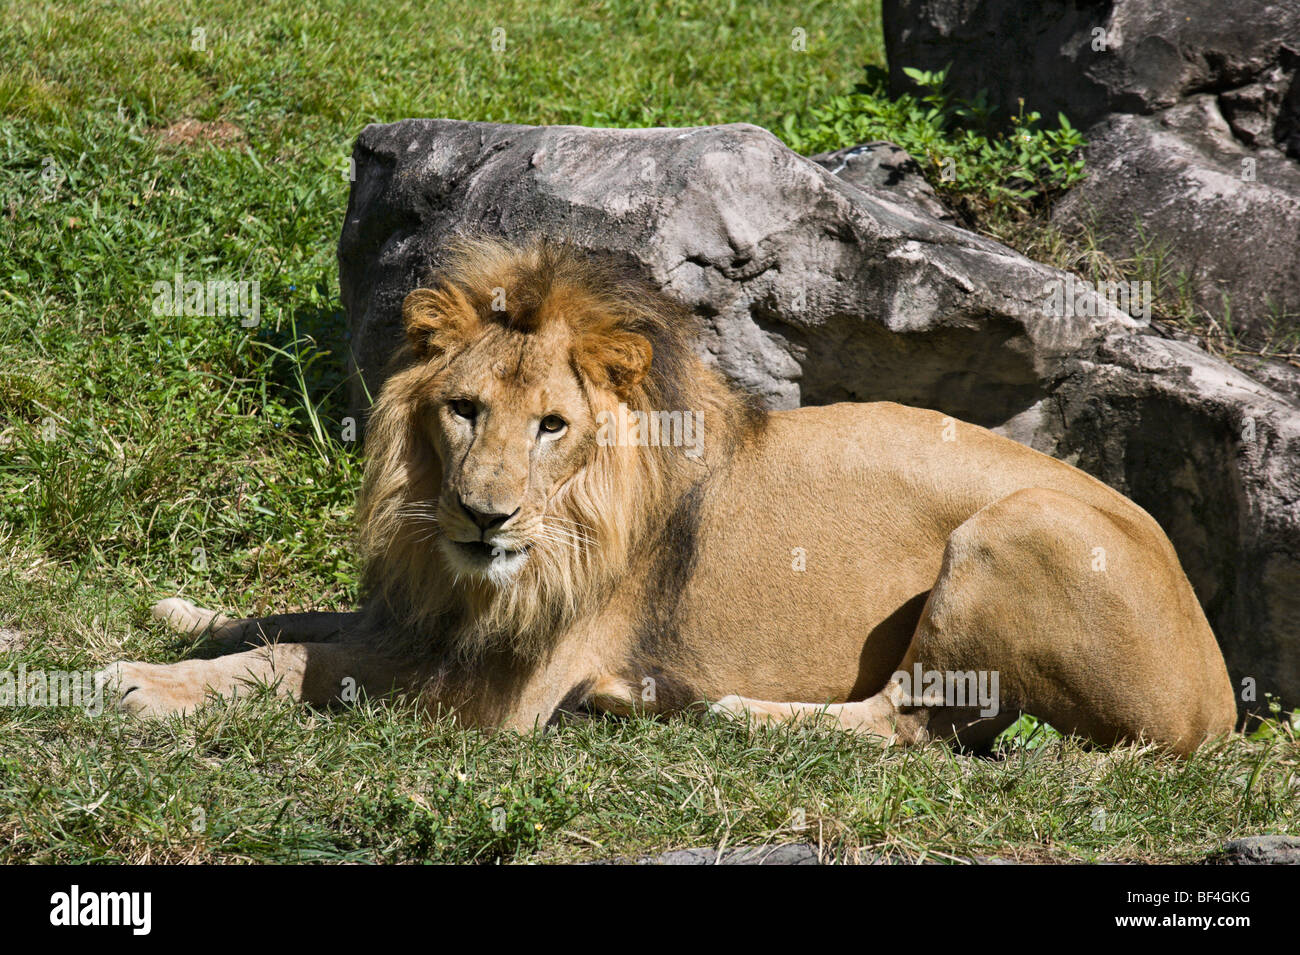 Lion (Panthera leo) looking straight at the camera, Edge of Africa, Busch Gardens, Tampa, Florida, USA Stock Photo